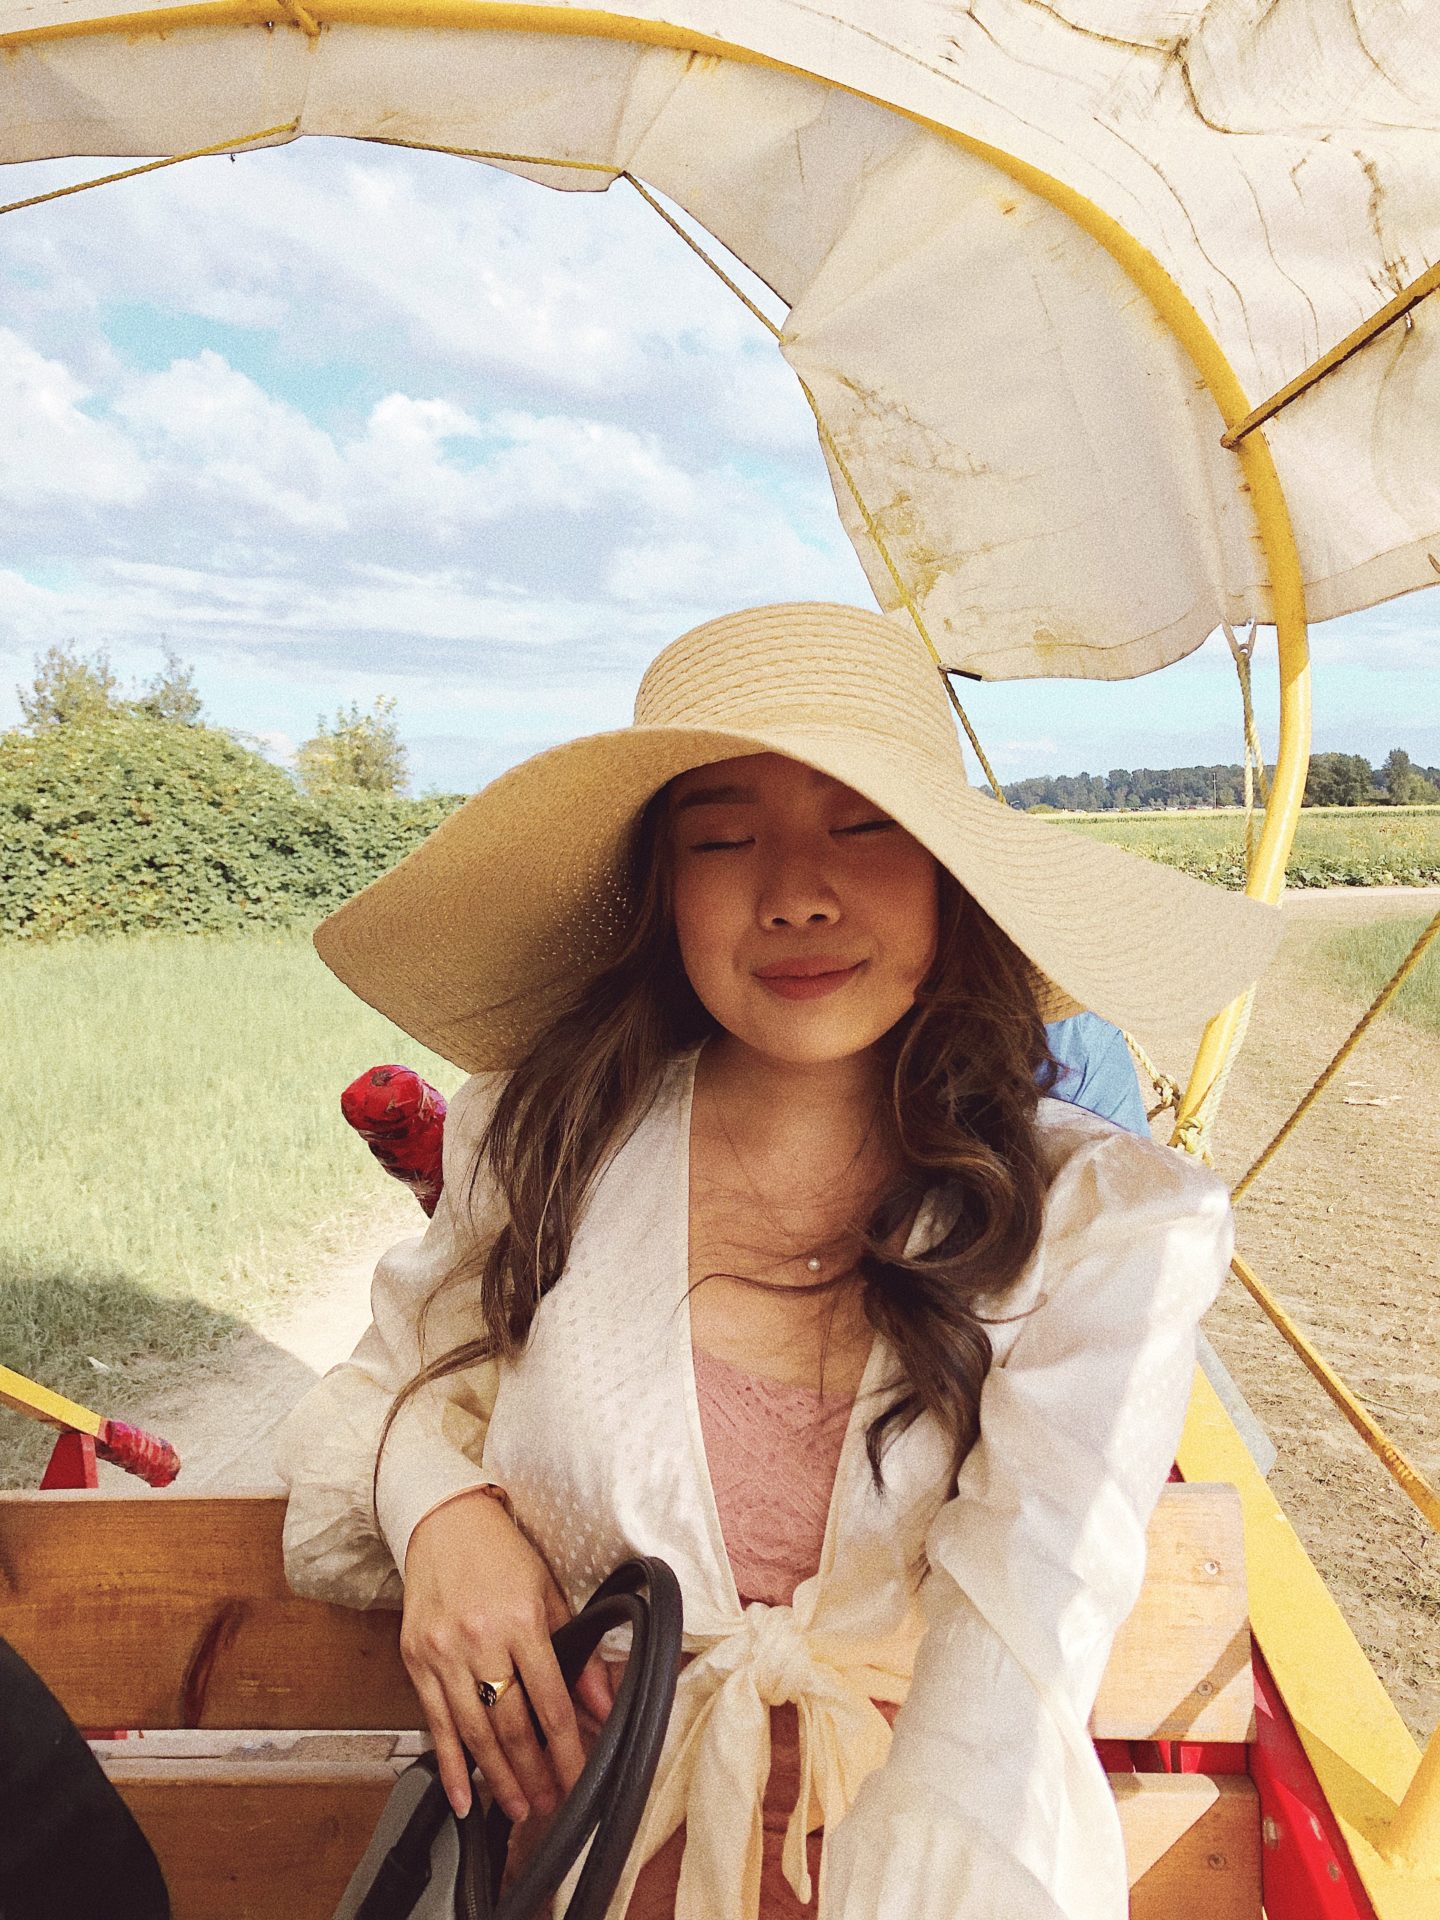 Going on a carriage ride at the sunflower festival 